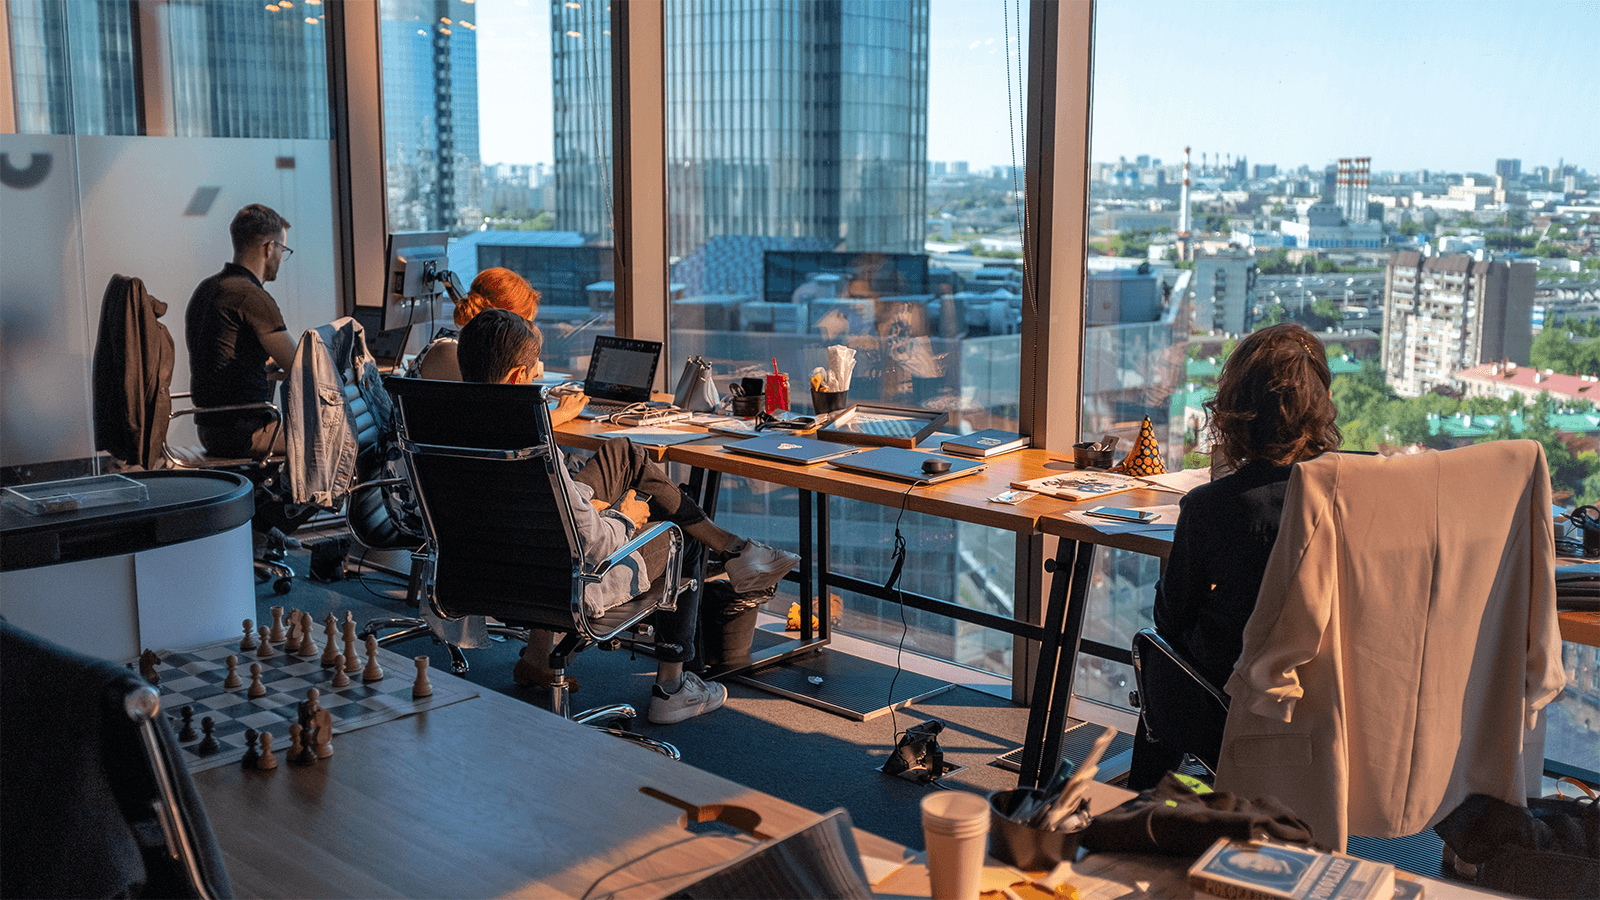 A group of people work at a communal workspace overlooking a cityscape. 